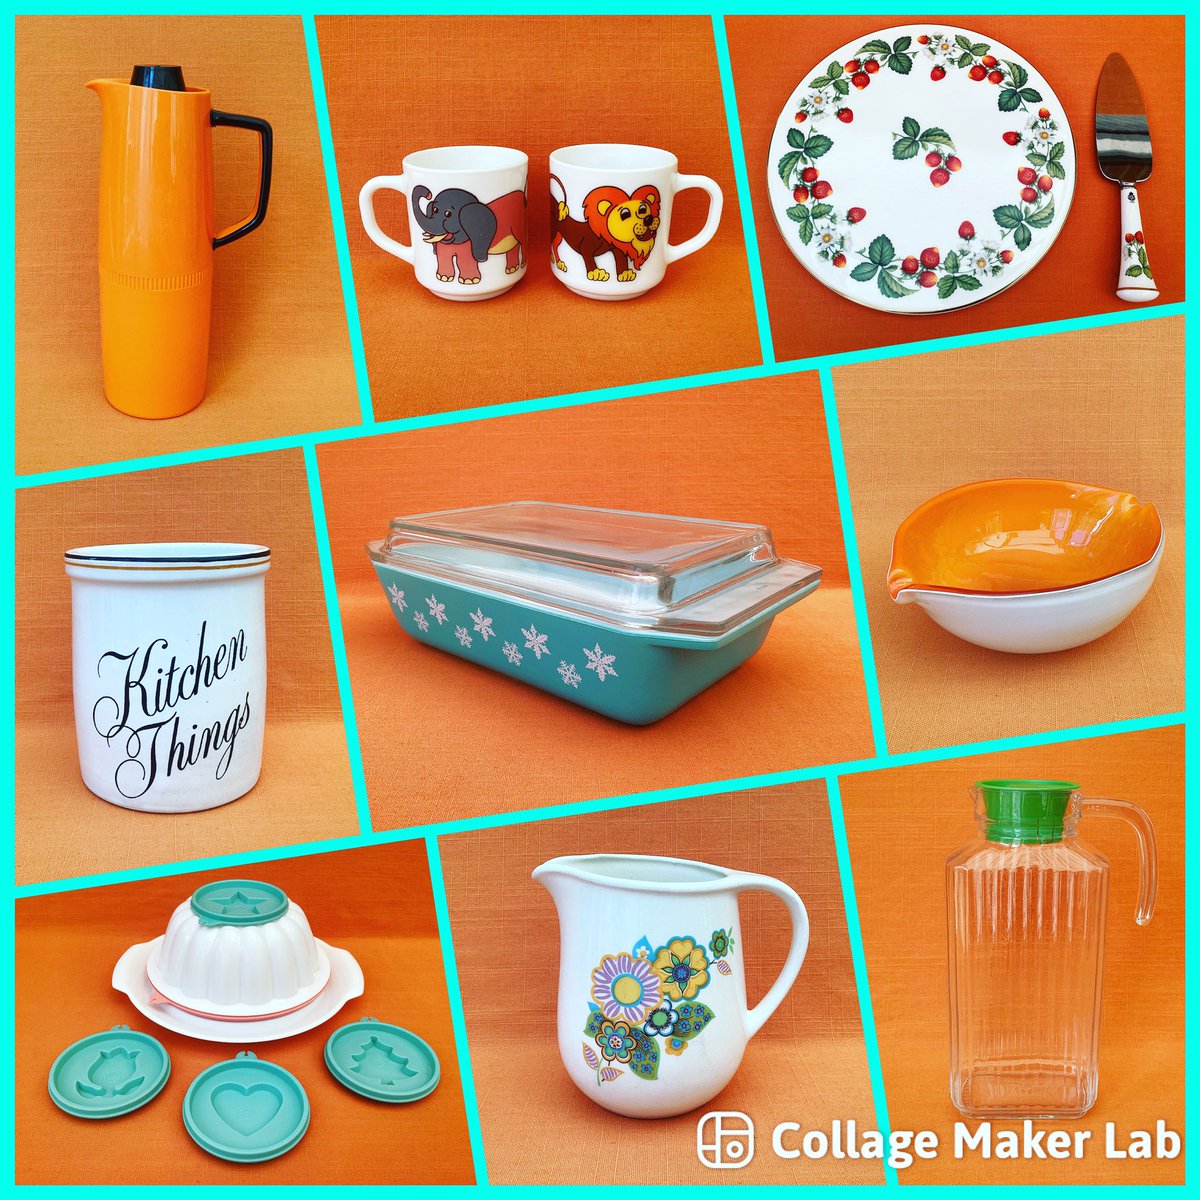 Just sharing my latest crop of #retro goodies - more to follow when I’ve cooled down a bit 😉🥵 

#vintagethermos #arcopalmugs #royalworcestercakeplate #strawberryplate #tggreen #turquoisepyrex #pyrexsnowflake #muranoglass  #tupperware #jellymould #fsromania #arcorocglass #1970s